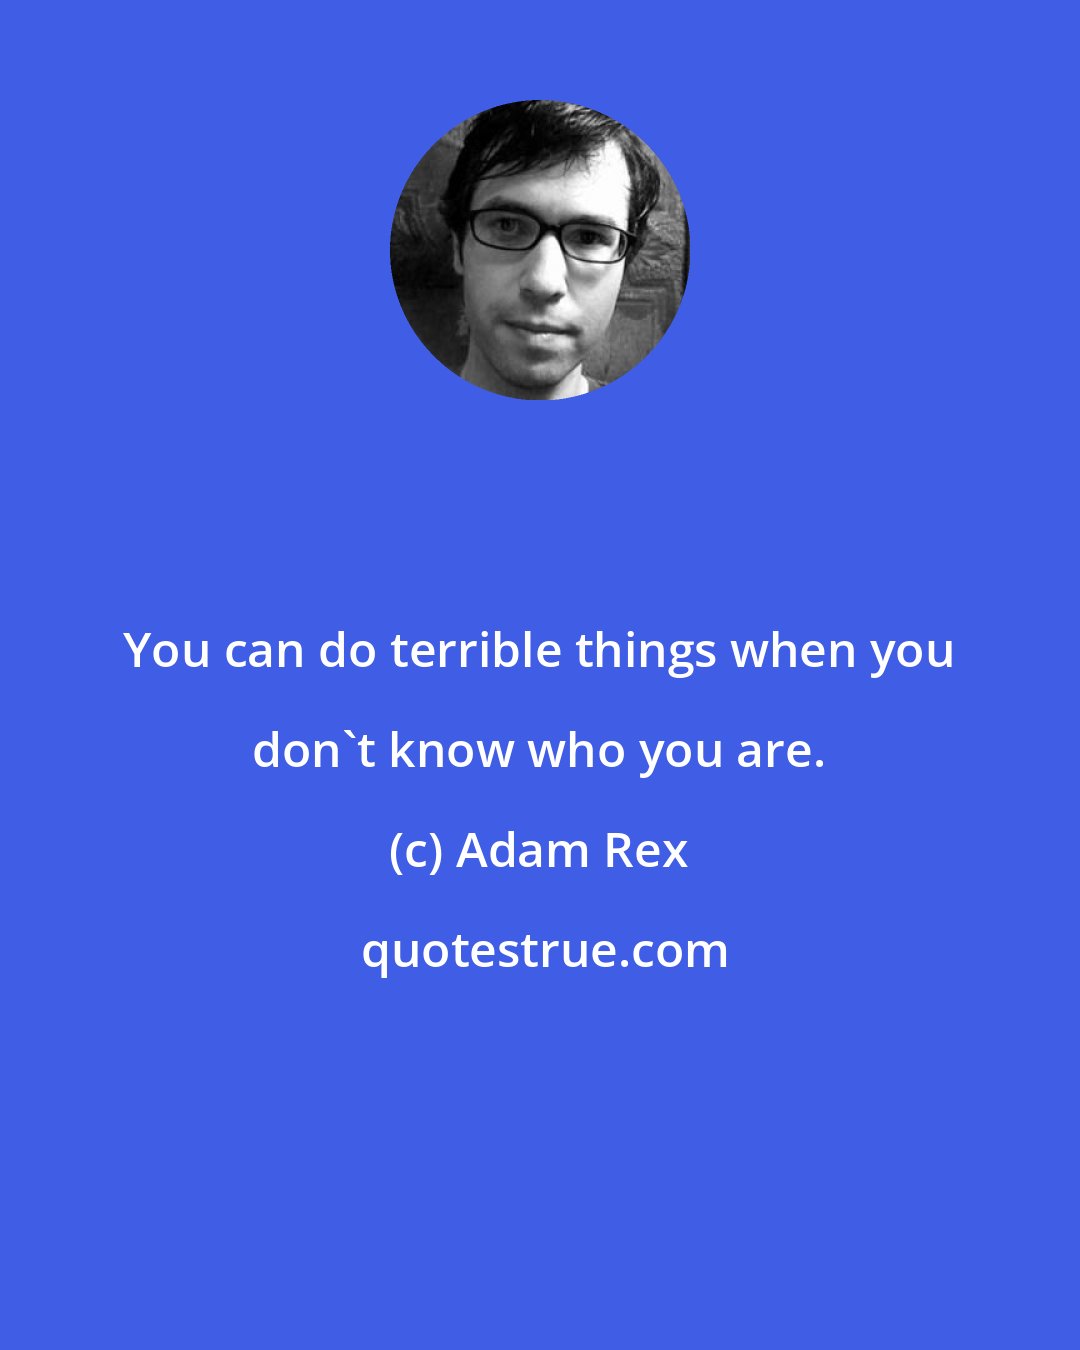 Adam Rex: You can do terrible things when you don't know who you are.